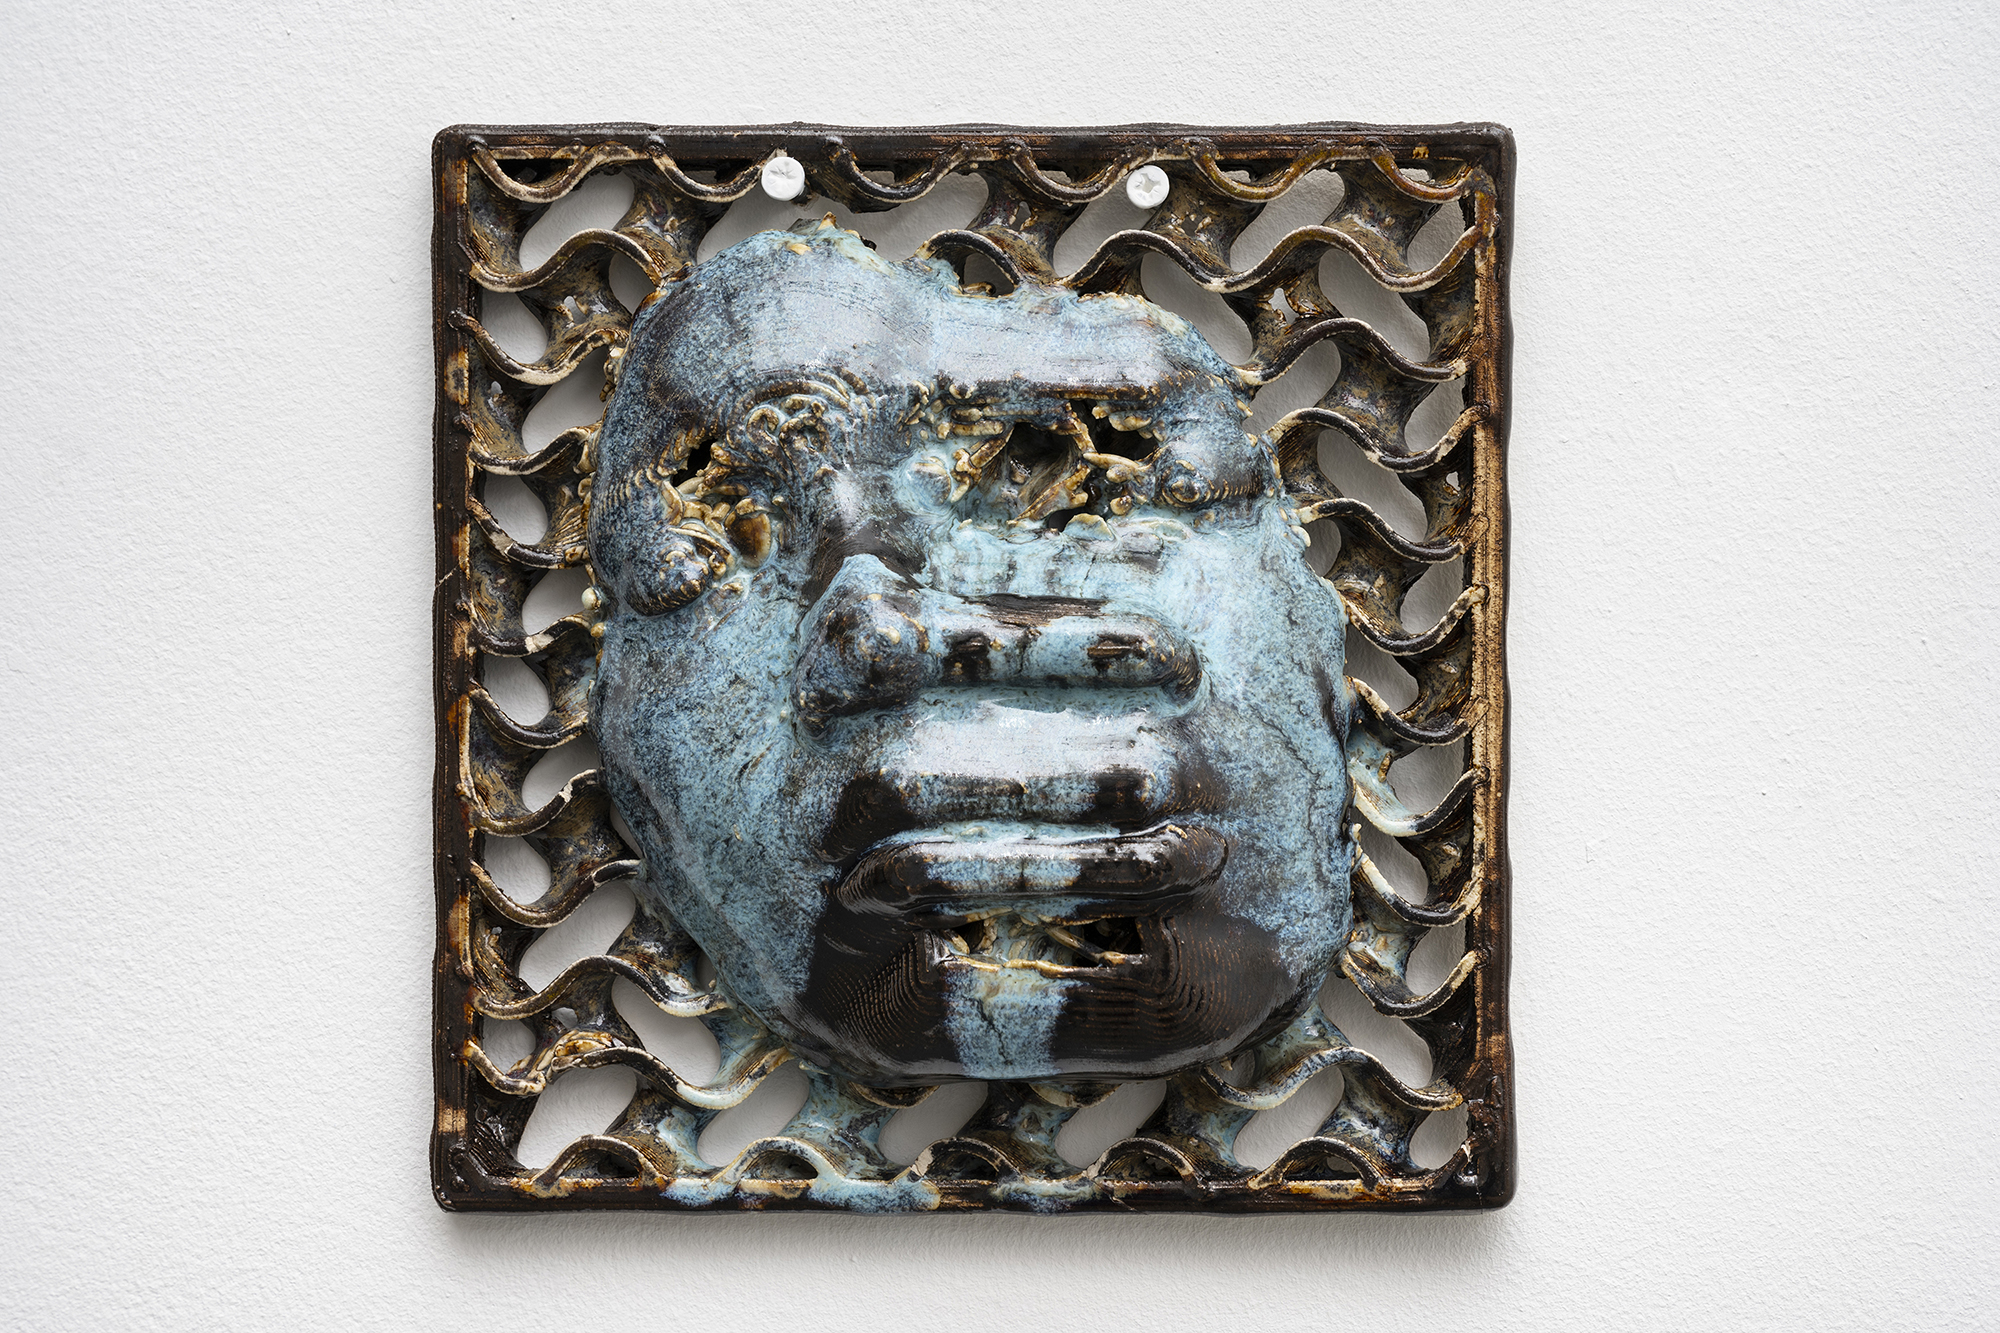 blue and brown 3D printed ceramic piece showing a glitched face with closed eyes in the center, surrounded by wave-like patterns on a white background